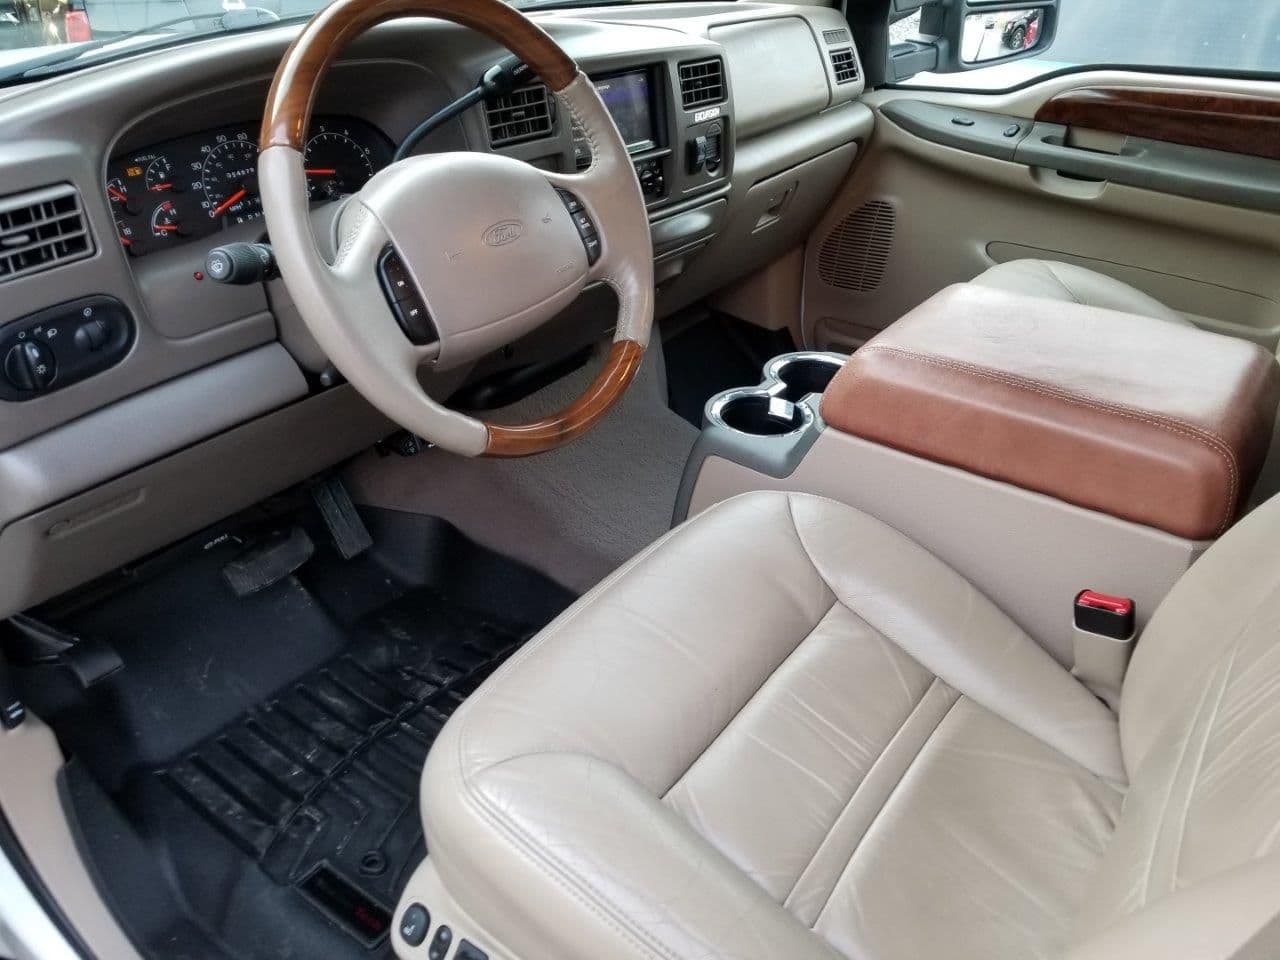 2000 Ford Excursion - 2000 Ford Excursion Limited 2WD *** 55K Miles*** Upgraded One of a Kind ******** - Used - VIN 1FMNU42S9YED59969 - 54,975 Miles - 10 cyl - 2WD - Automatic - SUV - White - Beaver Falls, PA 15010, United States